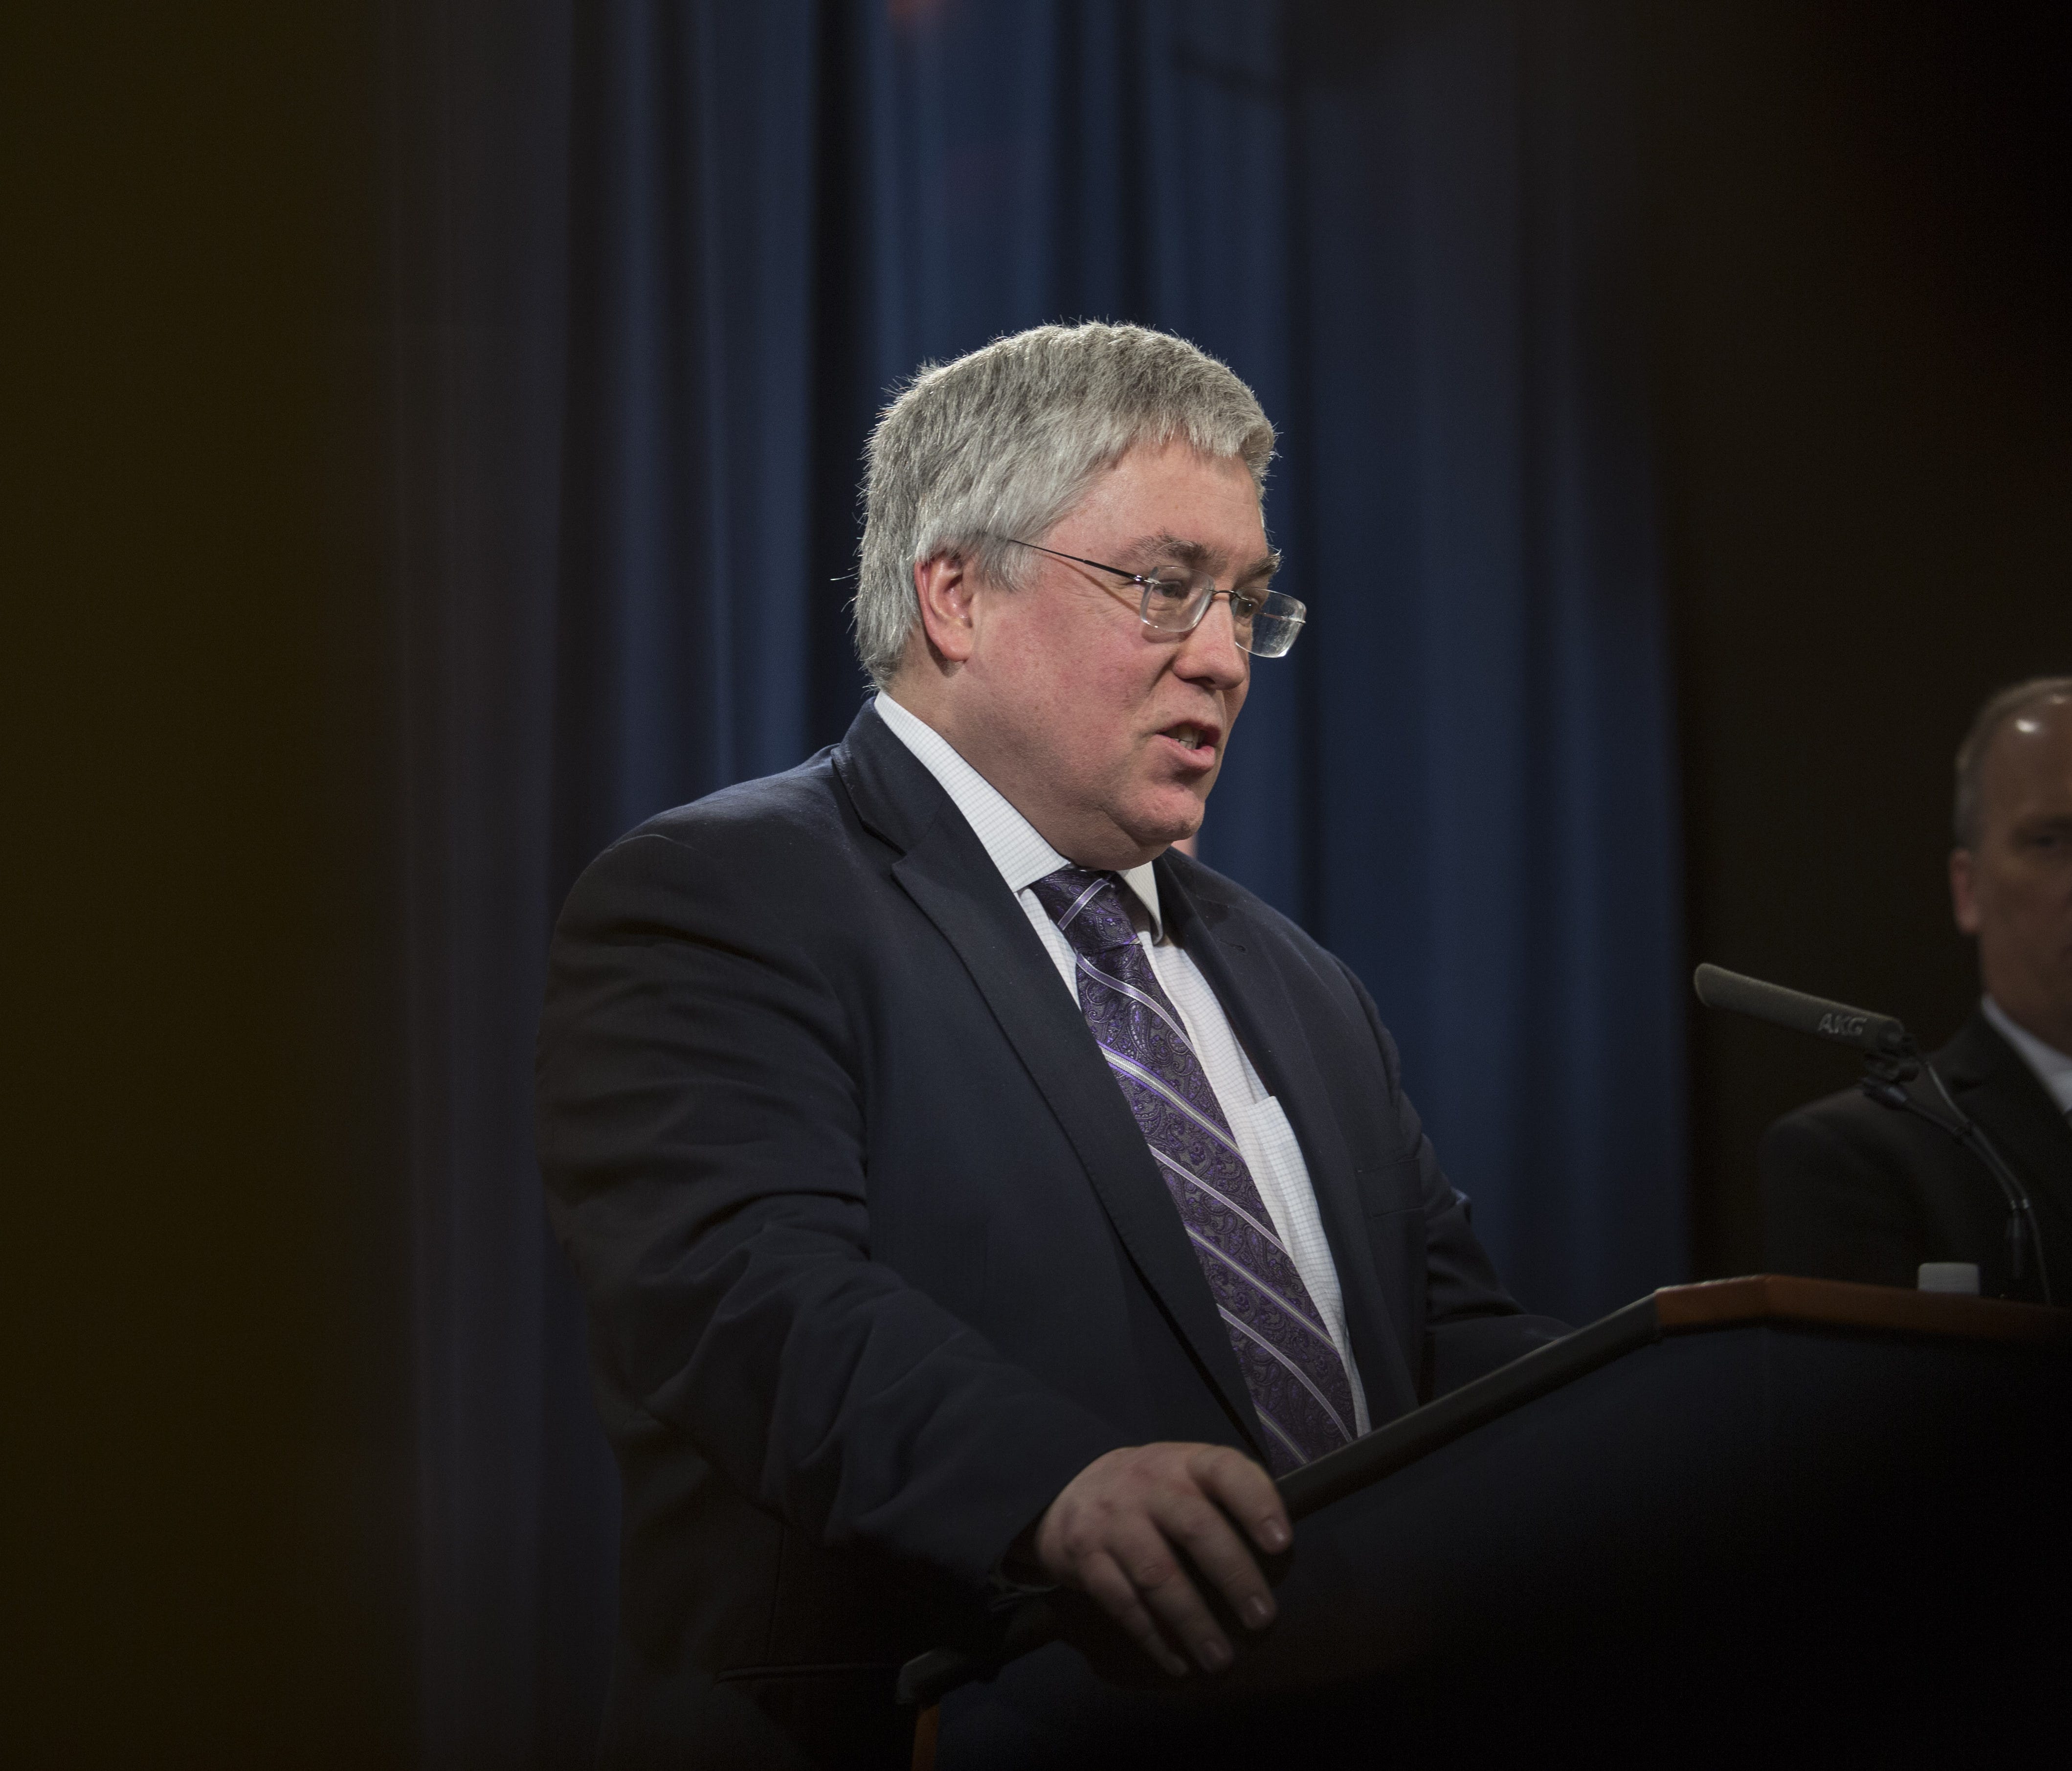 West Virginia Attorney General Patrick Morrisey speaks during a press conference at the Department of Justice in Washington, DC on February 27, 2018.